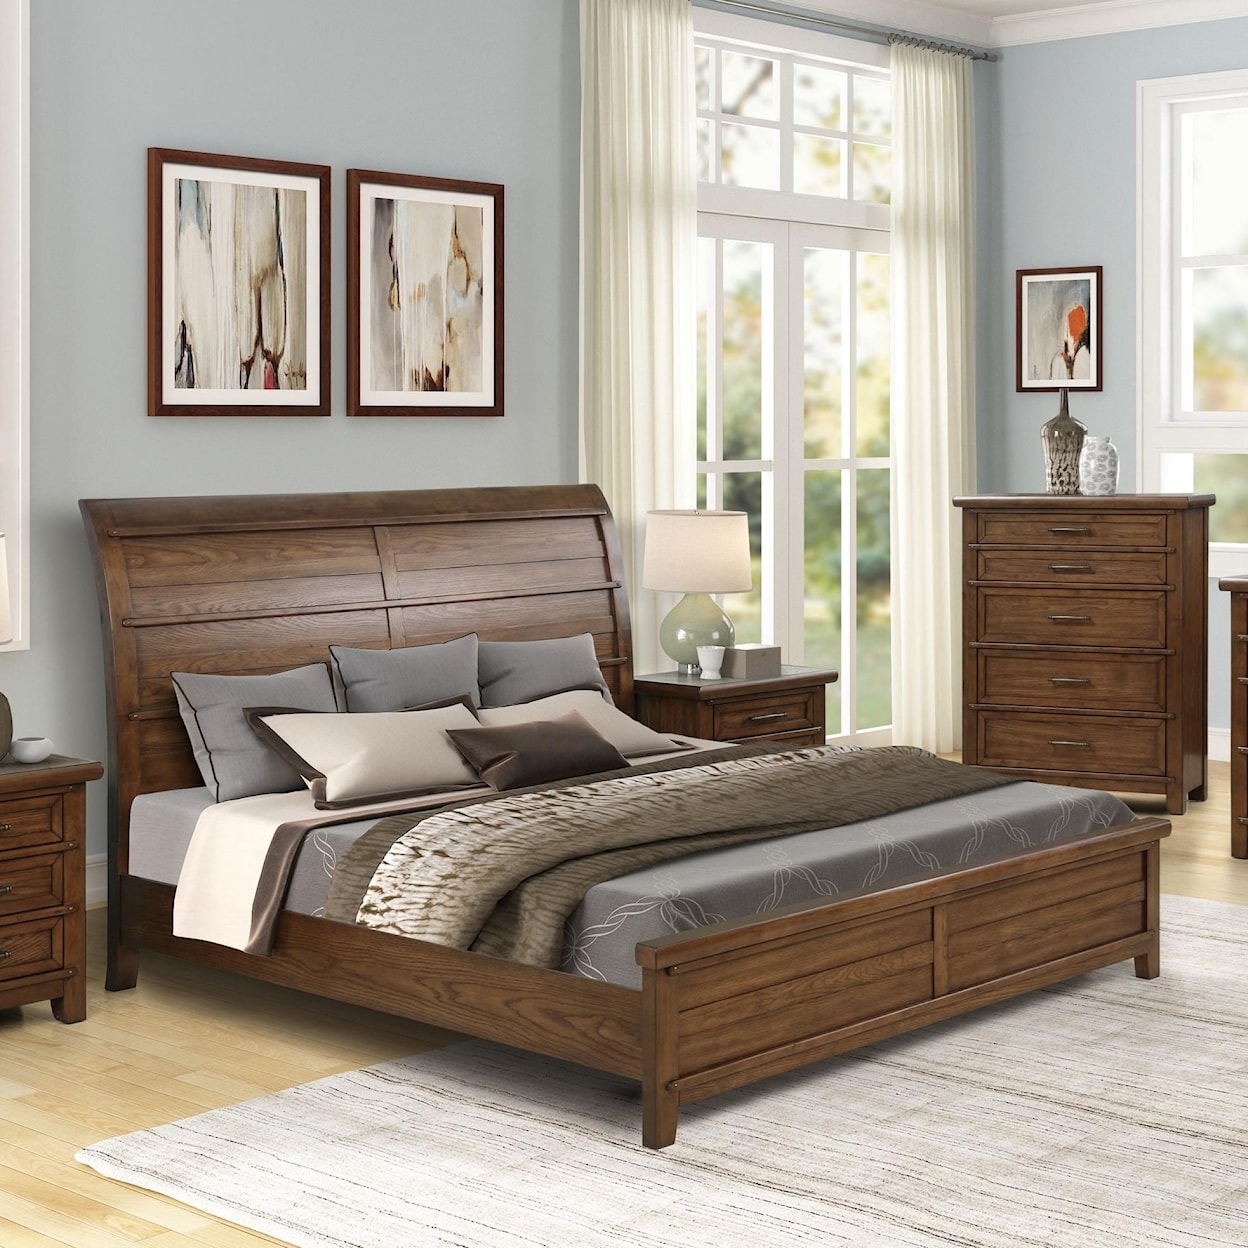 New Classic Furniture Fairfax County Queen Sleigh Bed